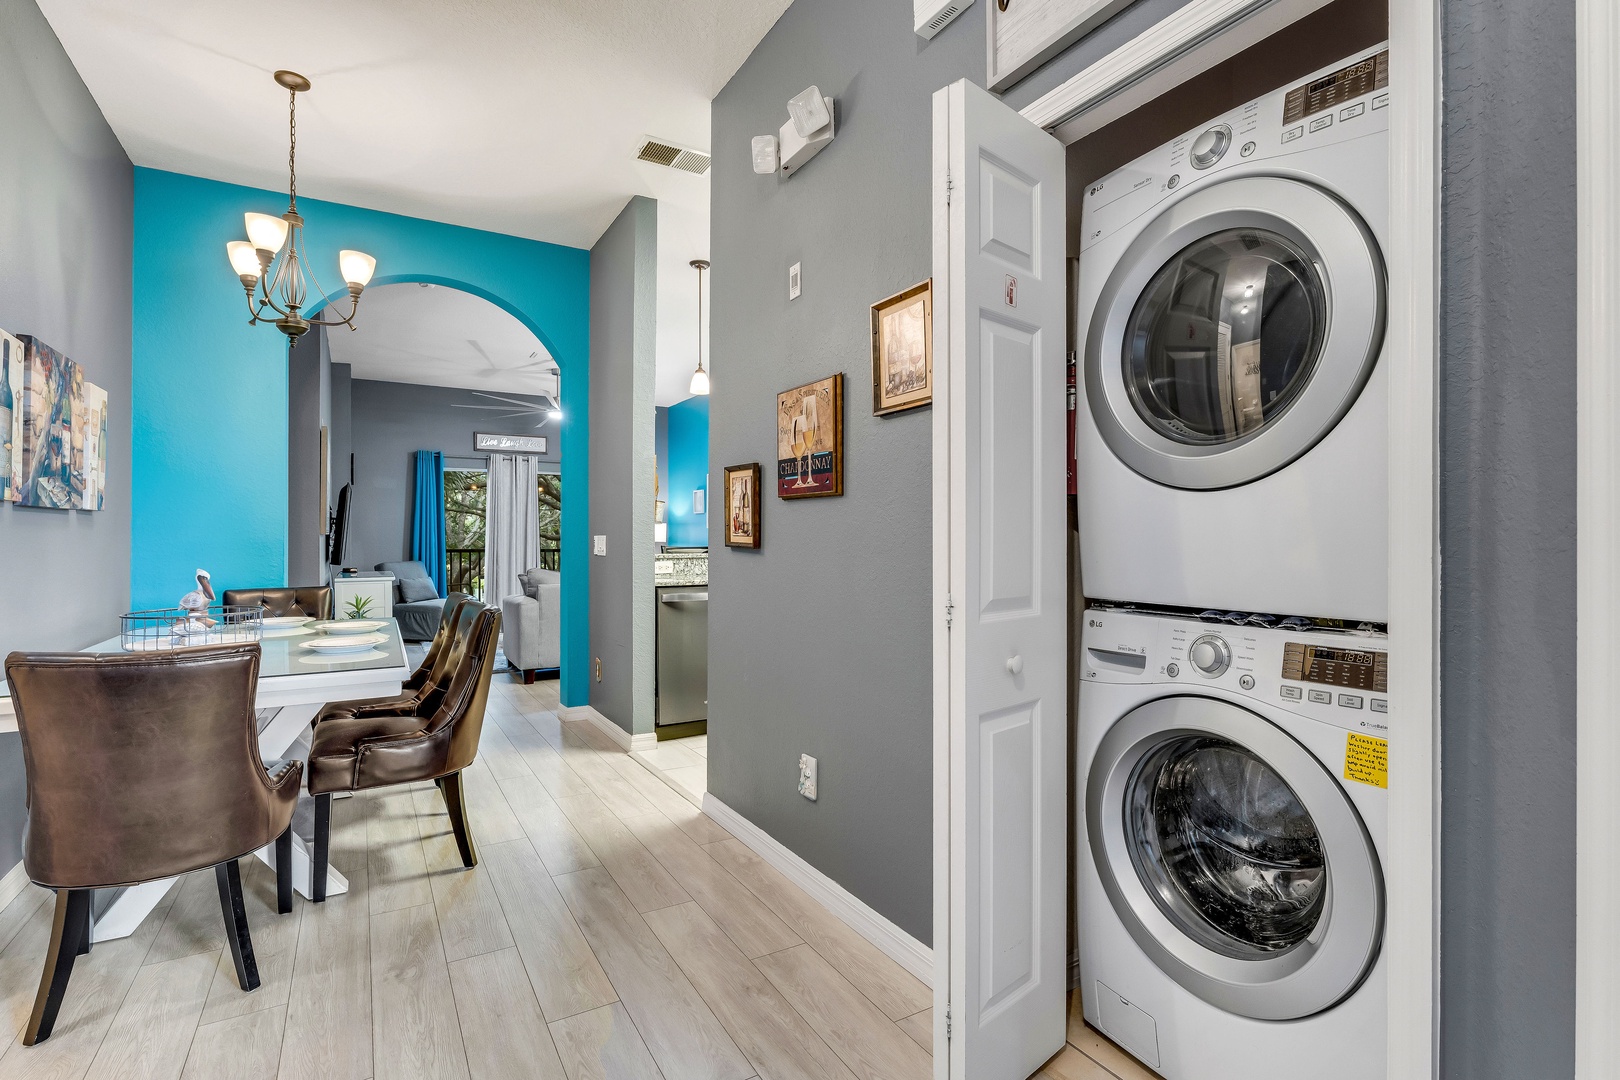 Private laundry is available during your stay, tucked away near the entry